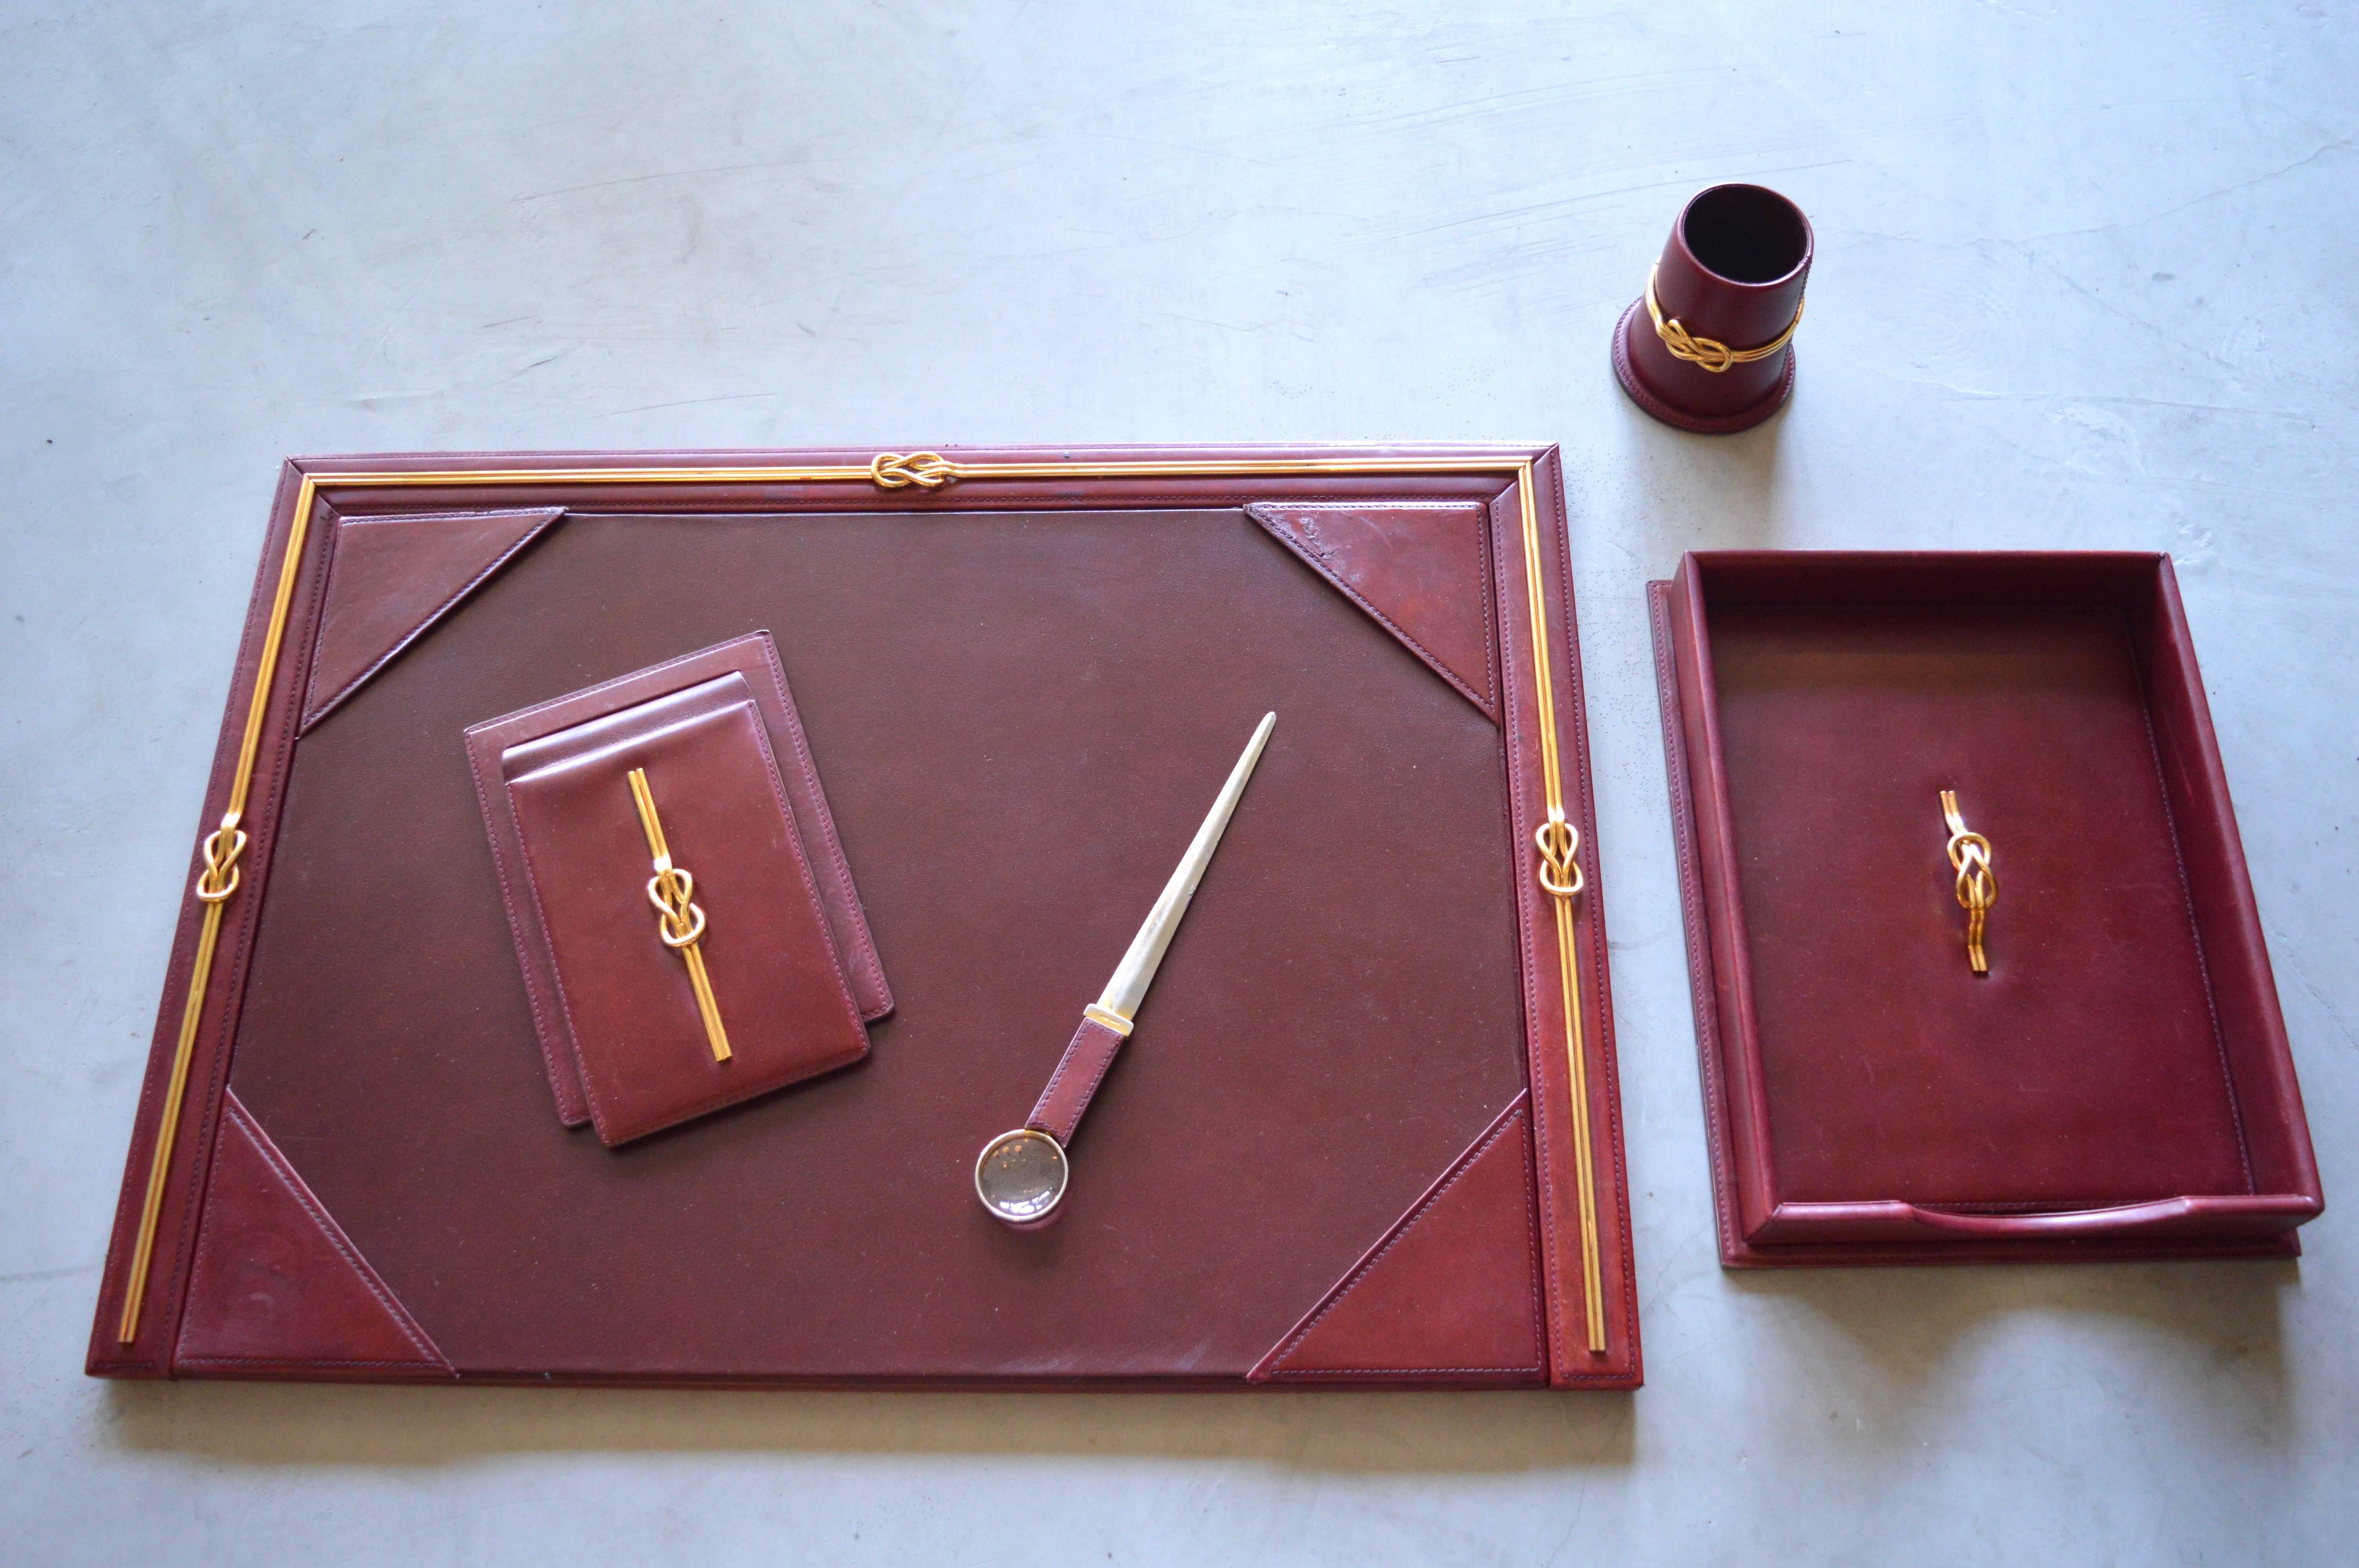 Gorgeous Gucci desk set in leather and brass. Deep red leather has excellent patina. Set includes: Large desk blotter, notepad holder, pen cup, large letter tray with cover and letter opener with magnifying glass tip. All pieces marked Gucci.